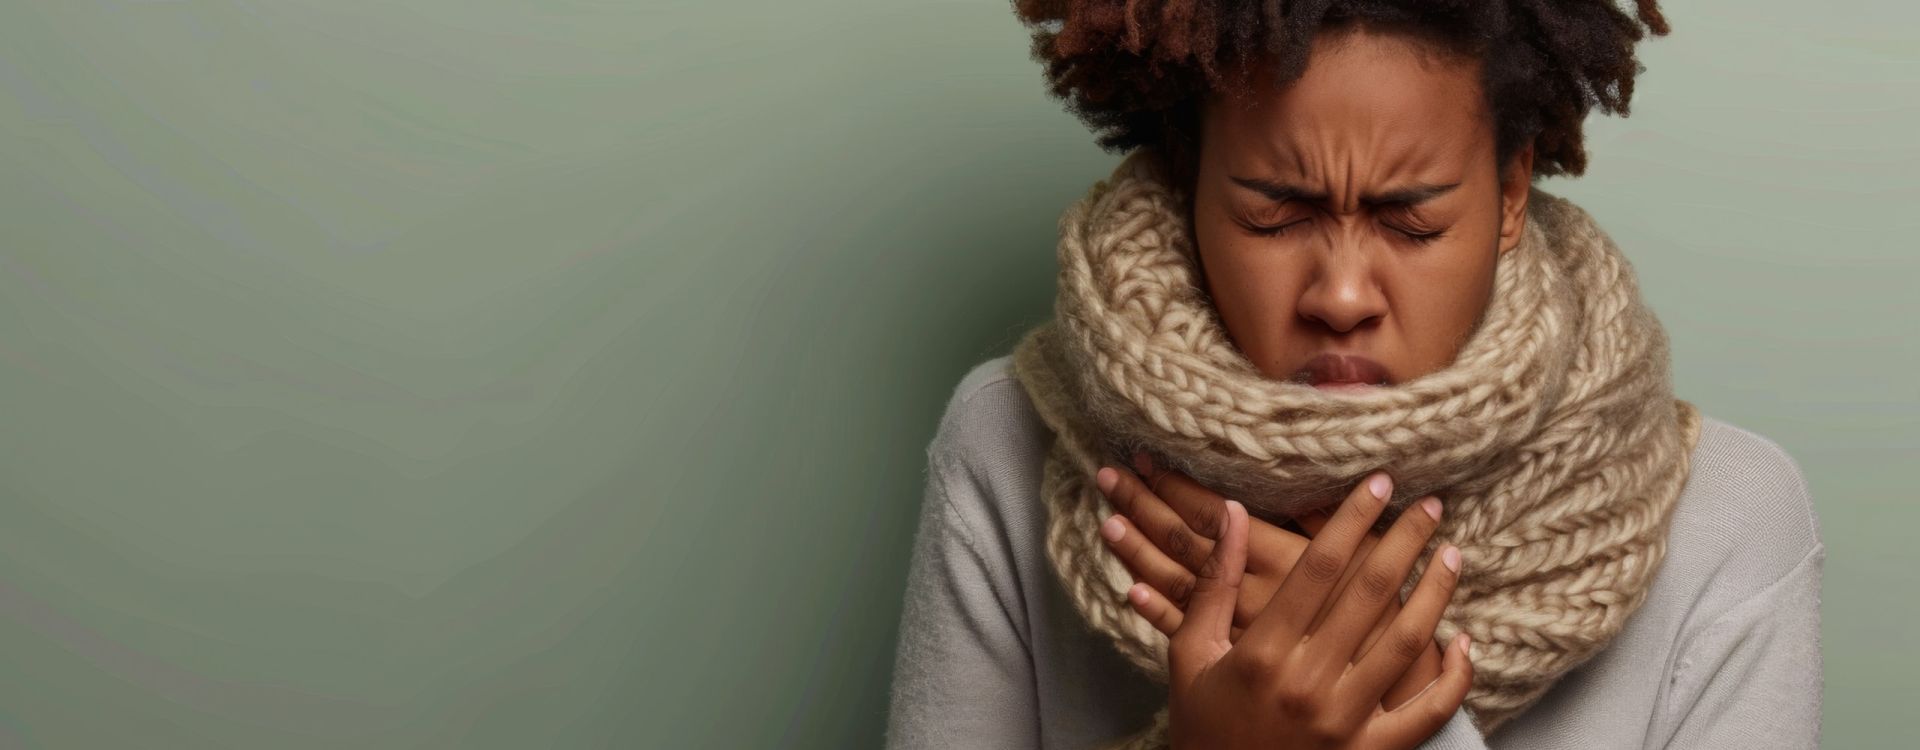 Sore Throat While Pregnant: What Can I Take? Article Image